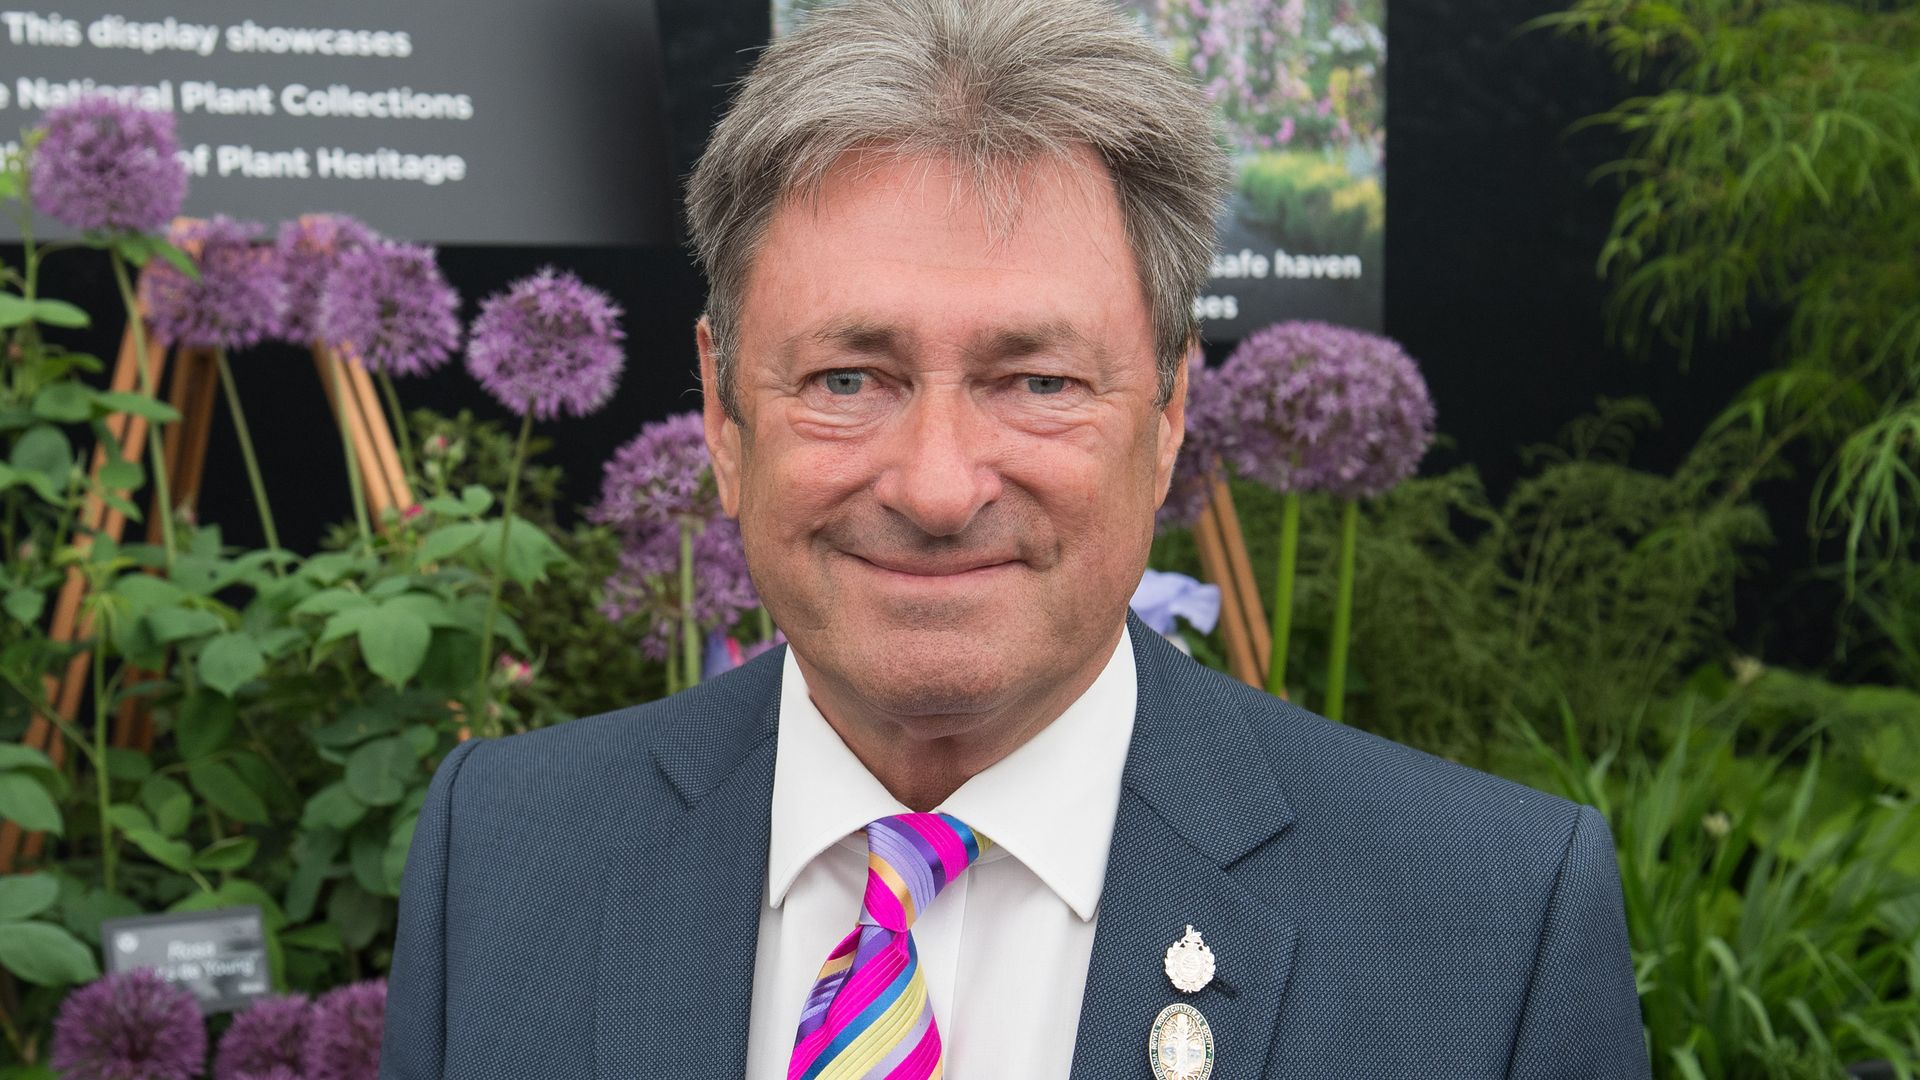 Alan Titchmarsh attends the Chelsea Flower Show 2018 on May 21, 2018